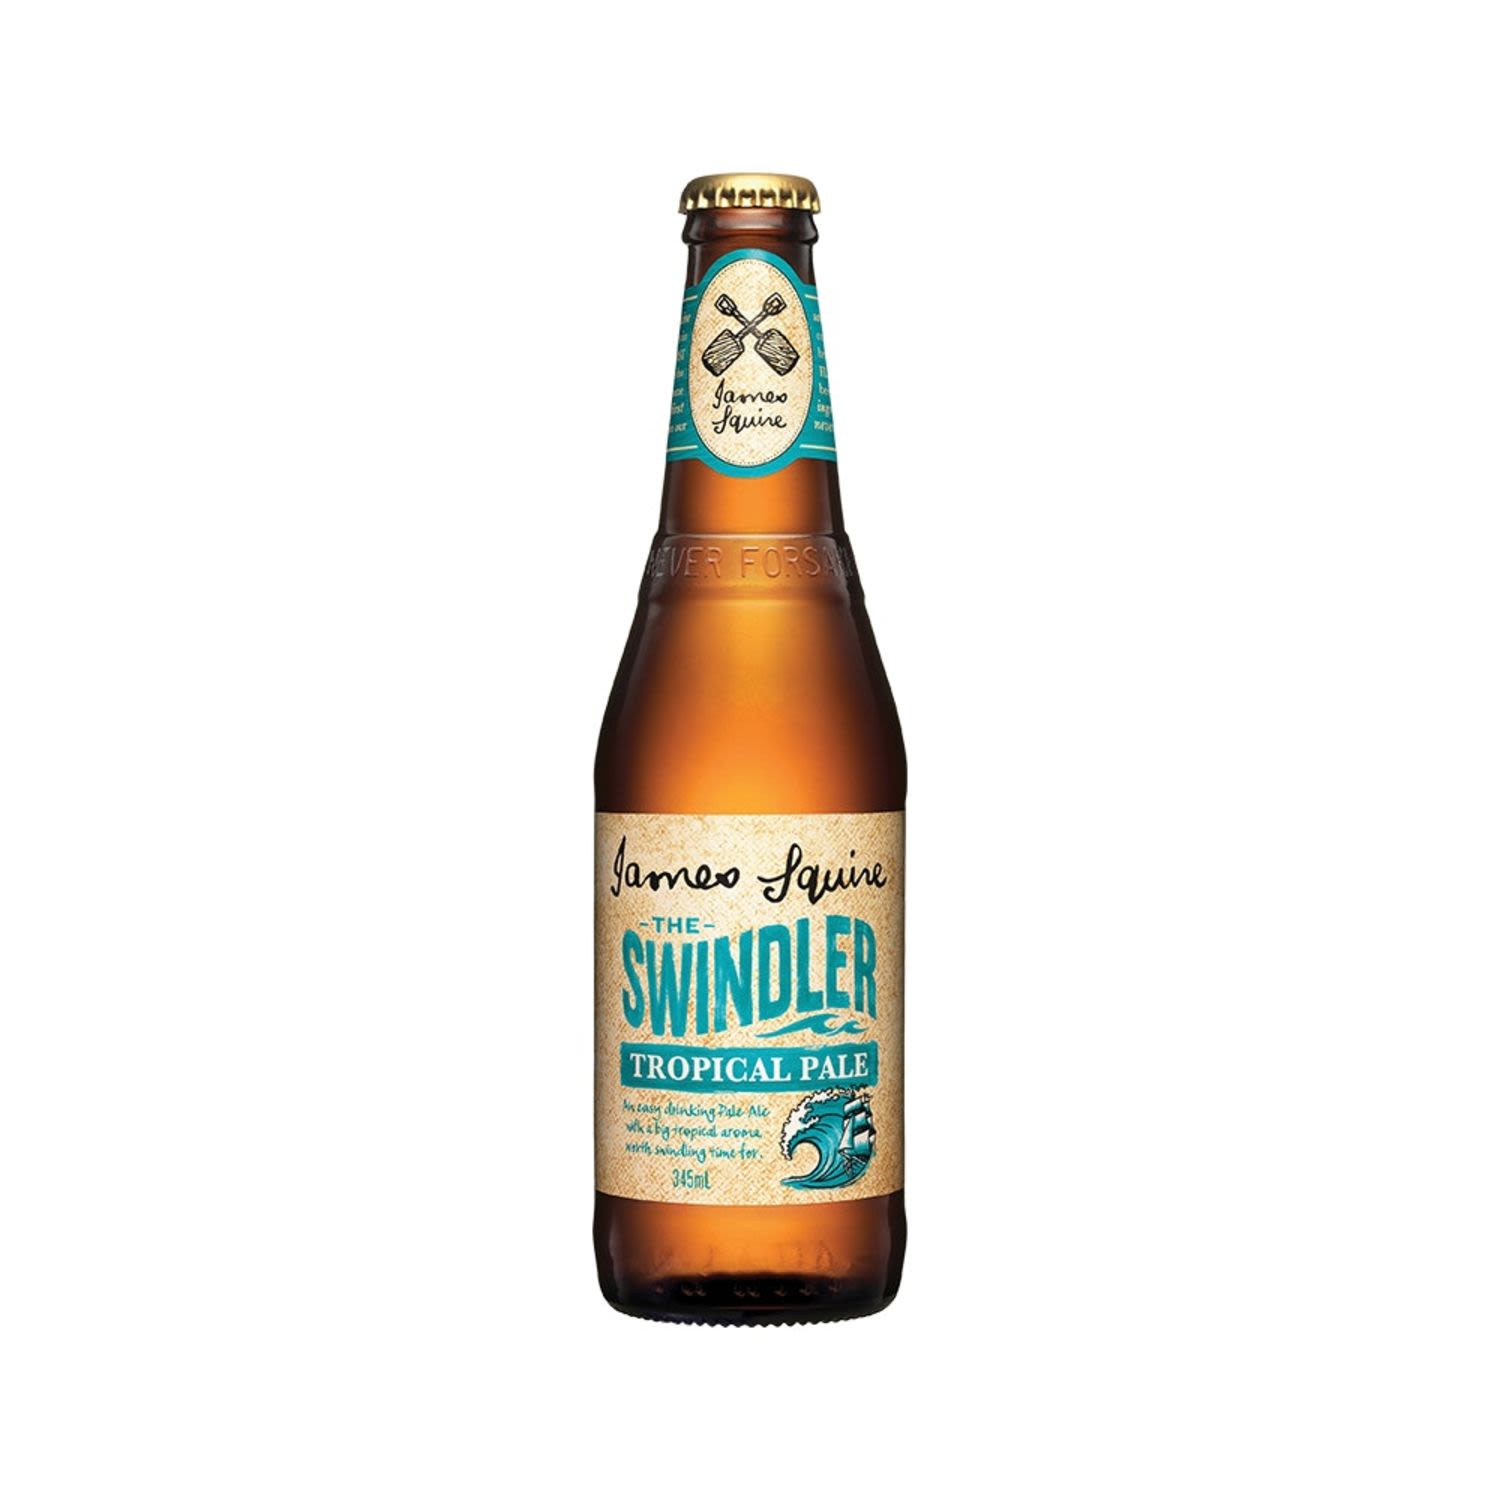 James Squire The Swindler Tropical Pale Ale Bottle 345mL